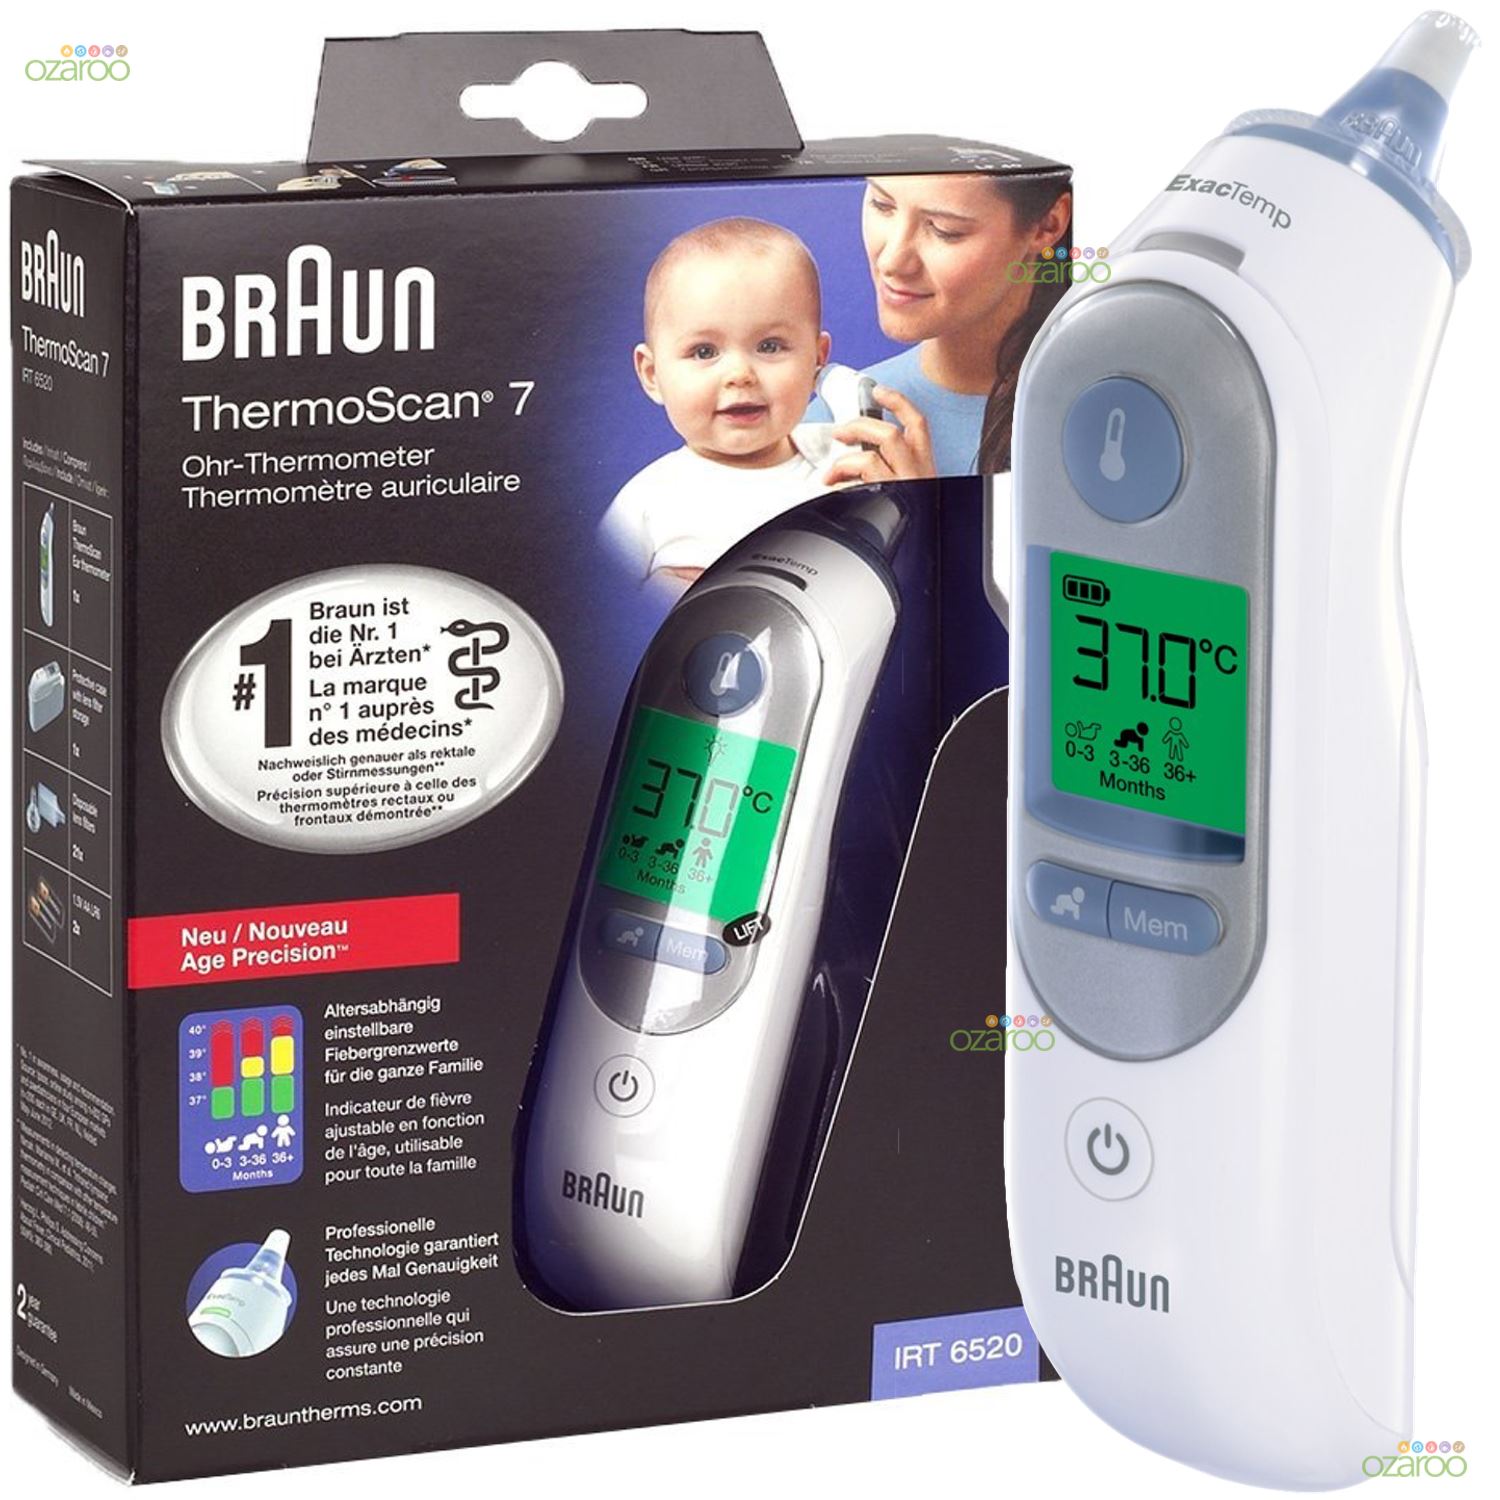 Braun ThermoScan 7 IRT6520 Baby/Adult Professional Digital Ear Thermometer